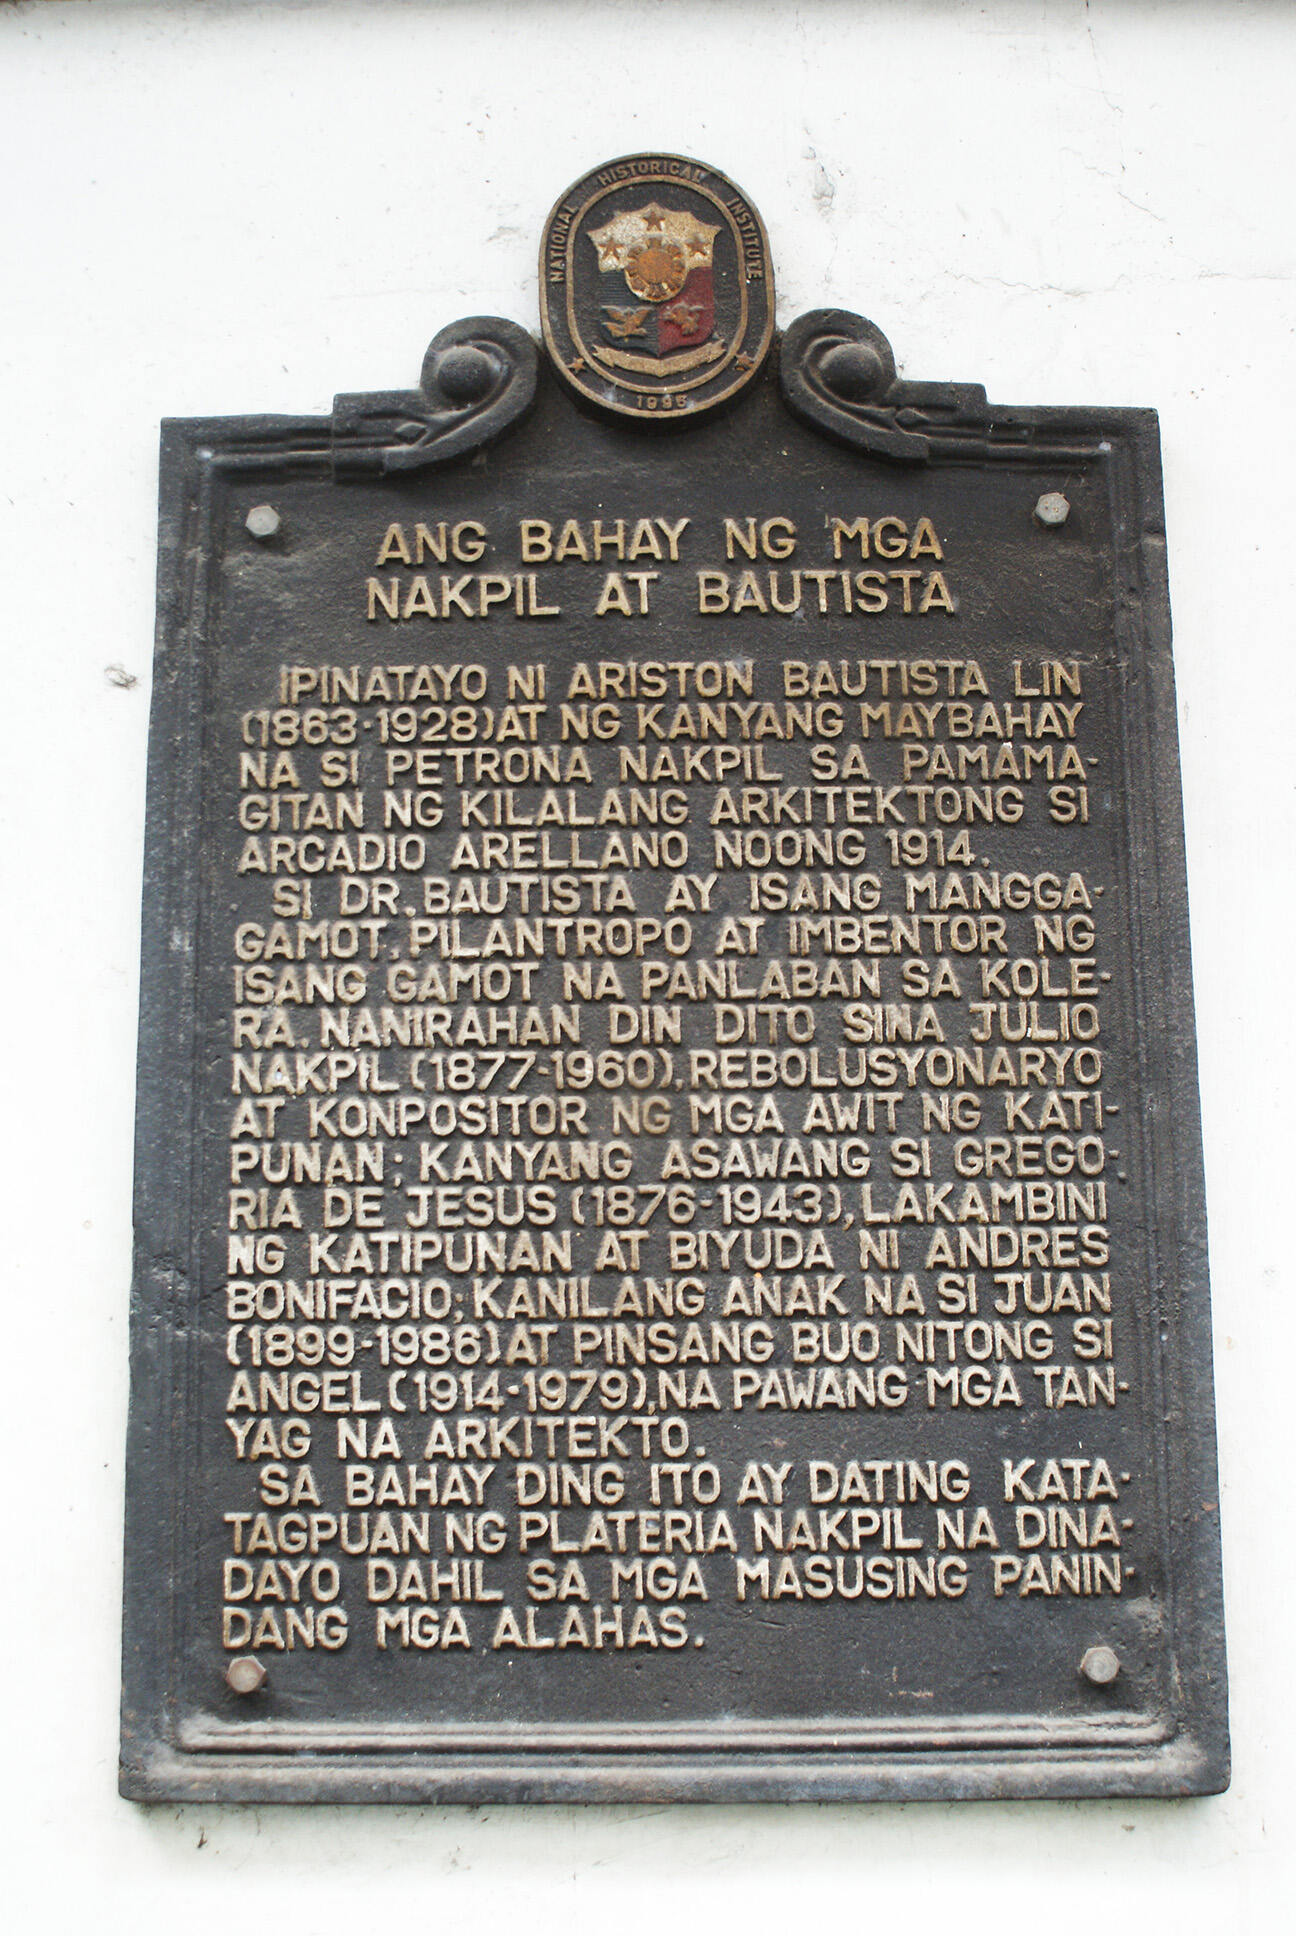 The National Historical Marker is located beside the main door of the Bahay Nakpil-Bautista house.